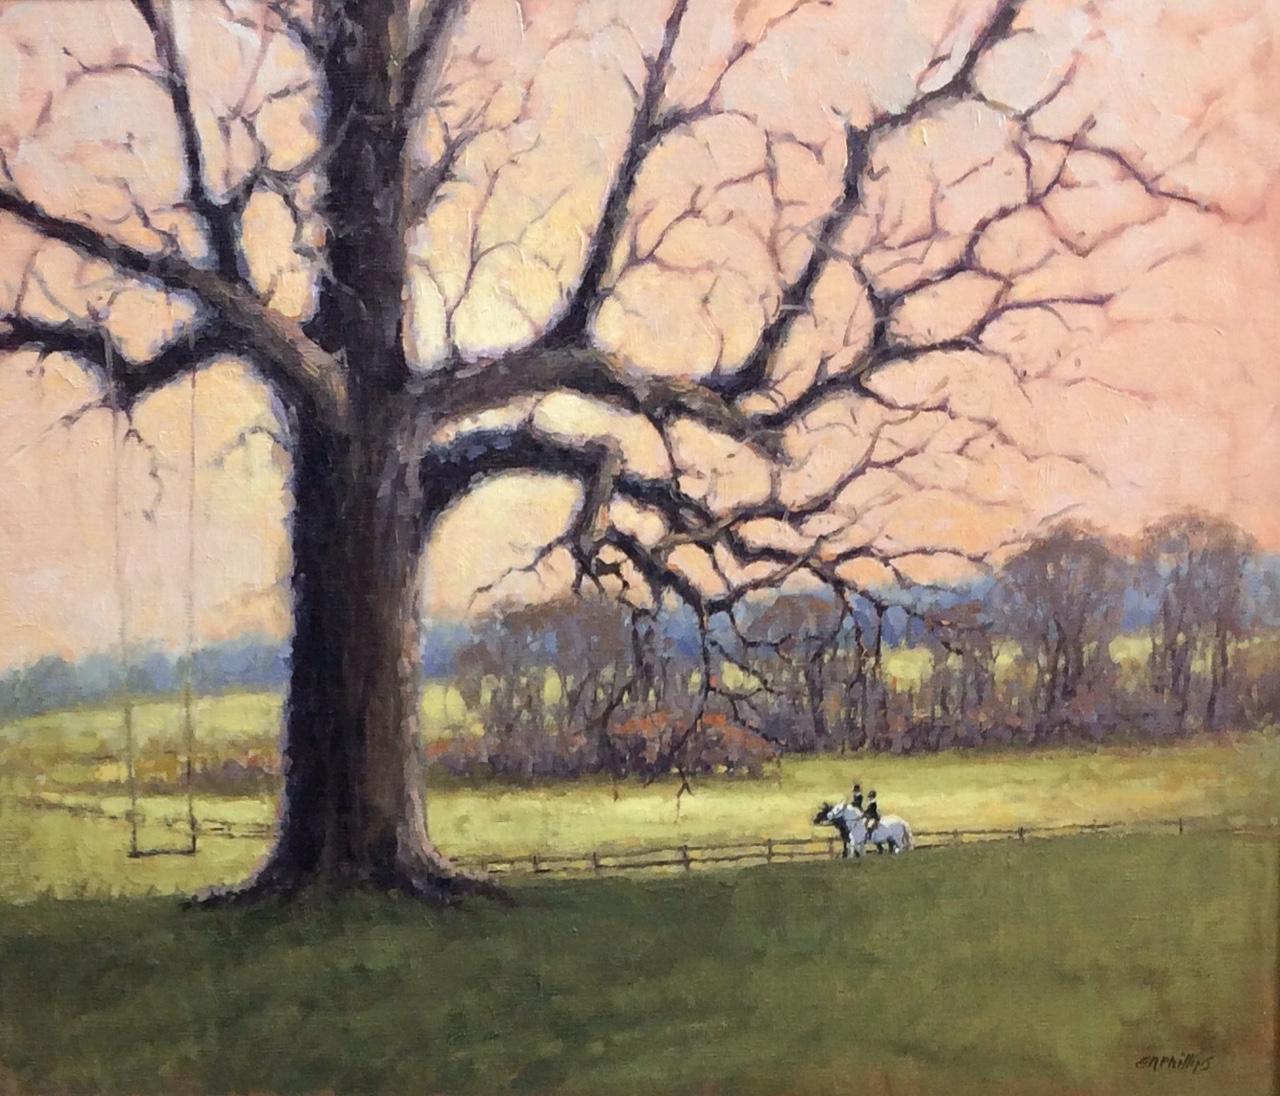 Morning Ride, original equestrian landscape - Painting by Elise N. Phillips